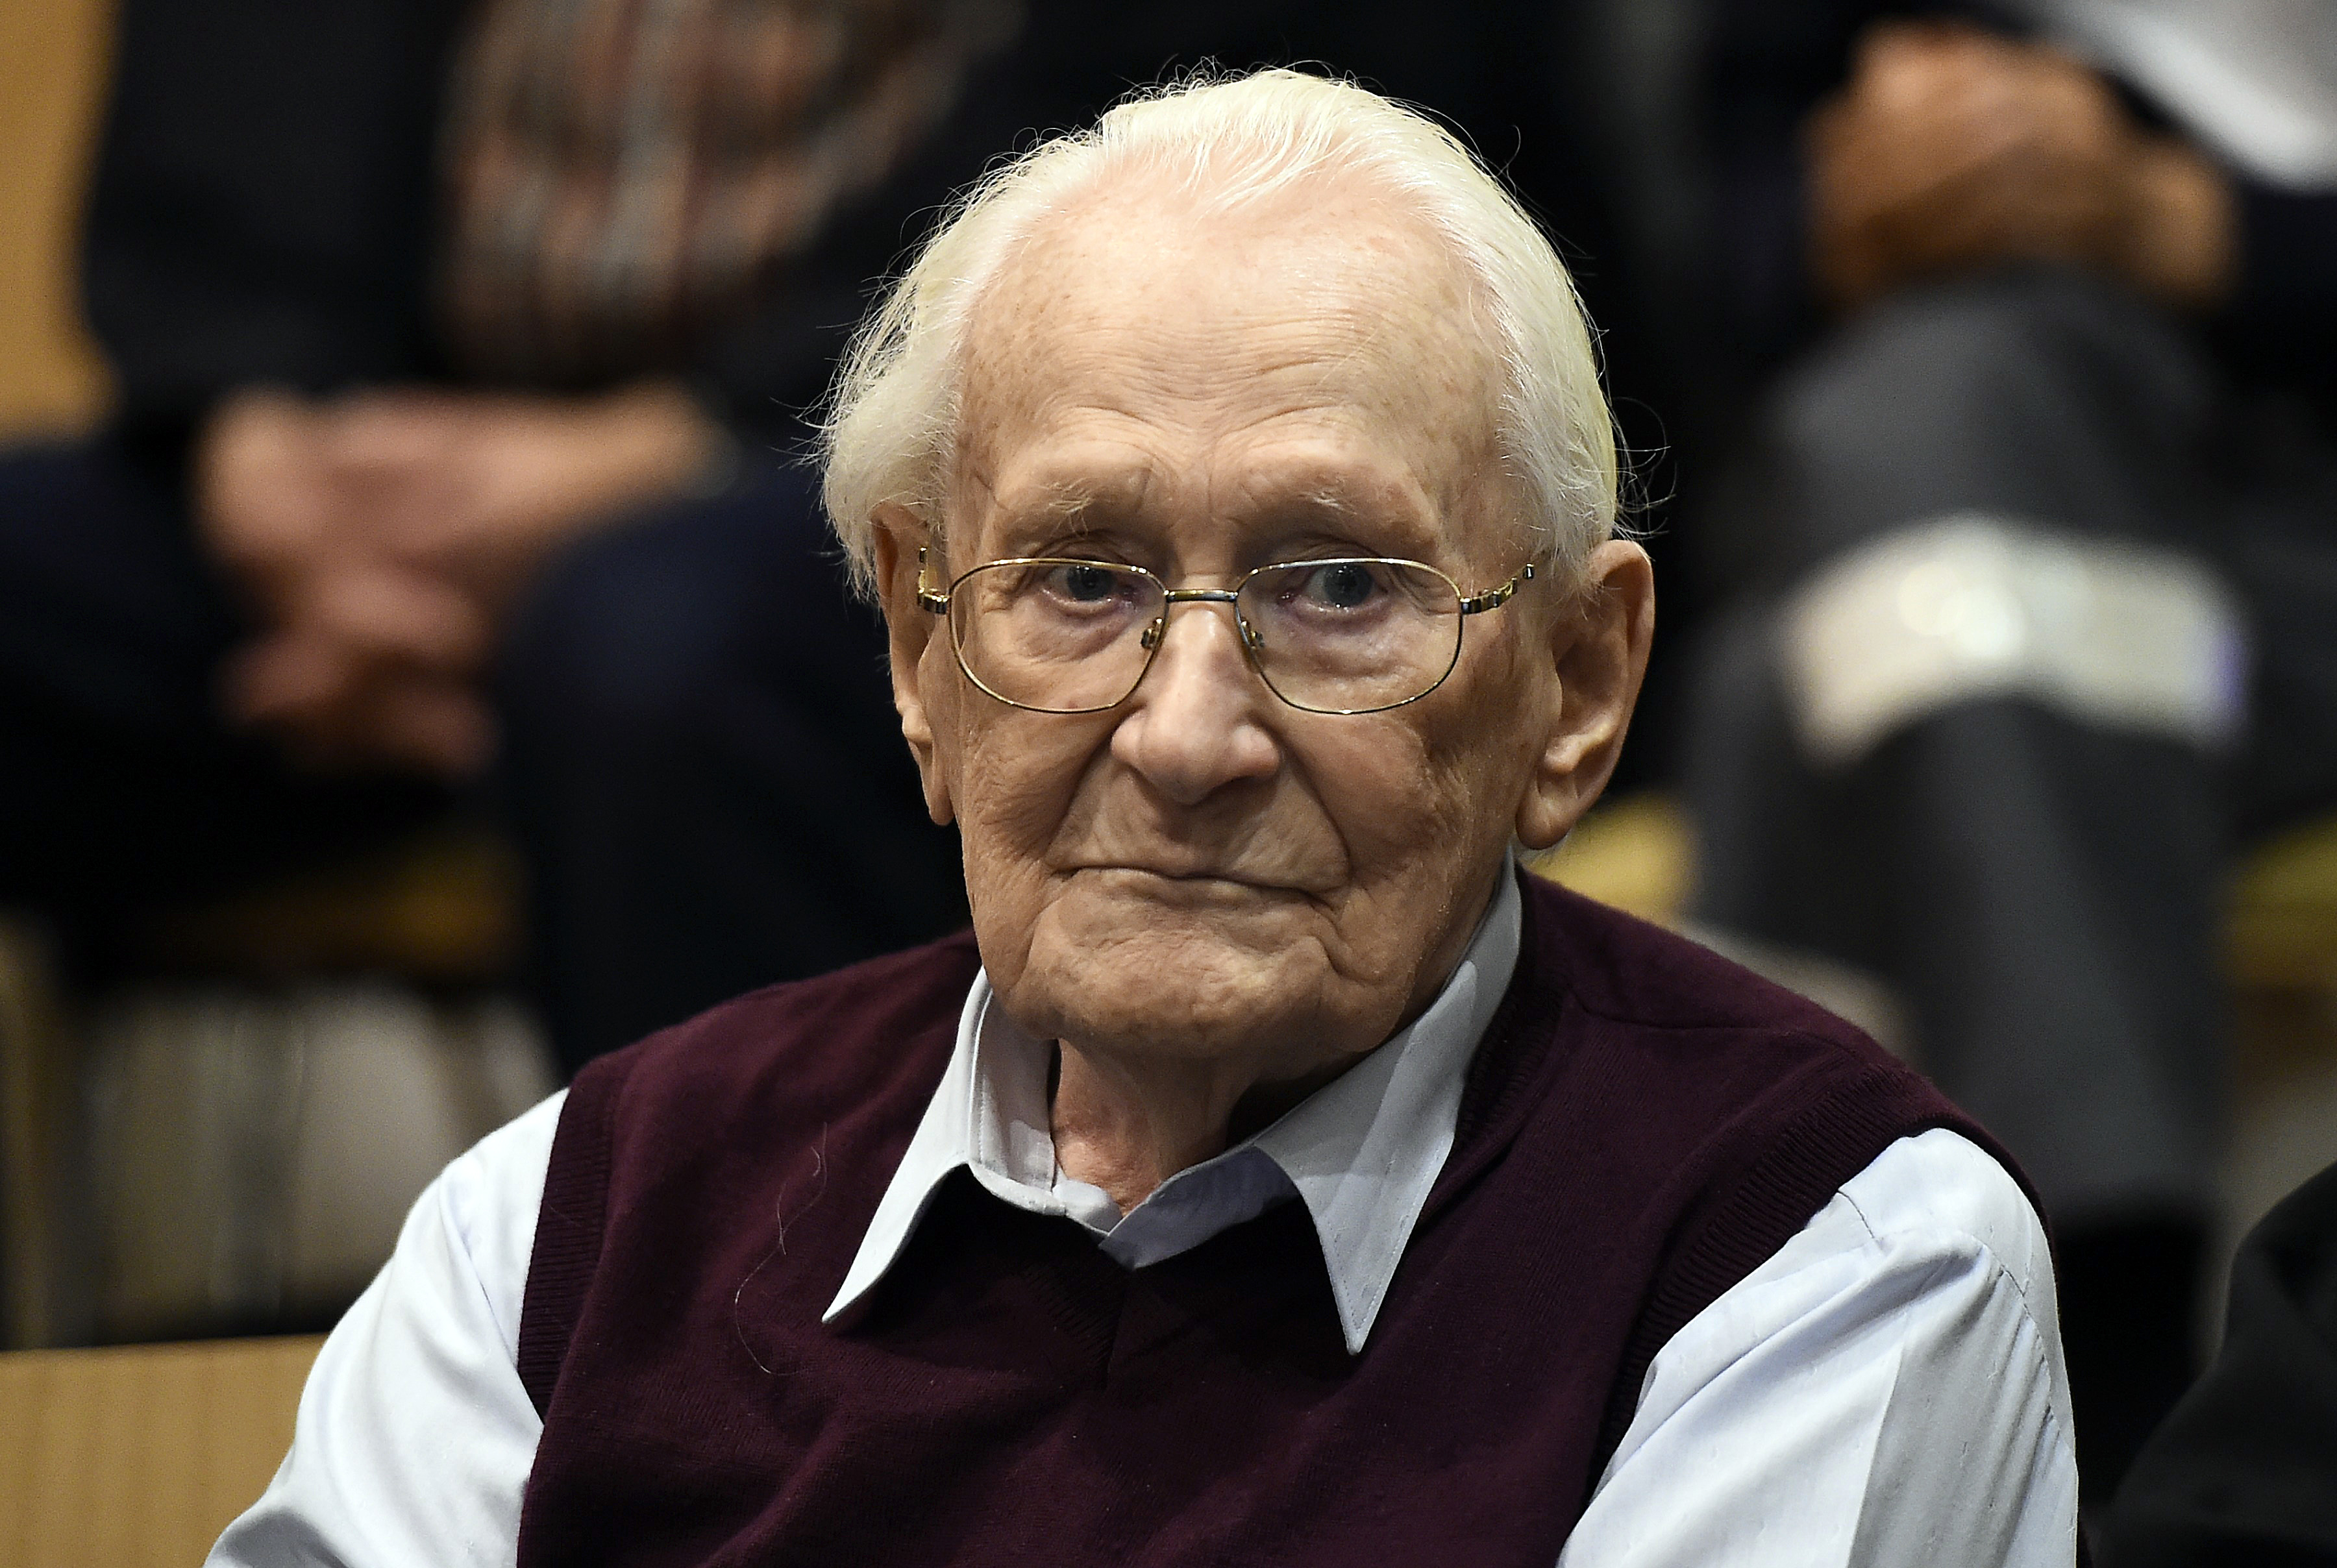 Oskar Groening, defendant and former Nazi SS officer dubbed the "bookkeeper of Auschwitz", sits in the courtroom during his trial in Lueneburg, Germany, July 15, 2015. (Axel Heimken&mdash;REUTERS)